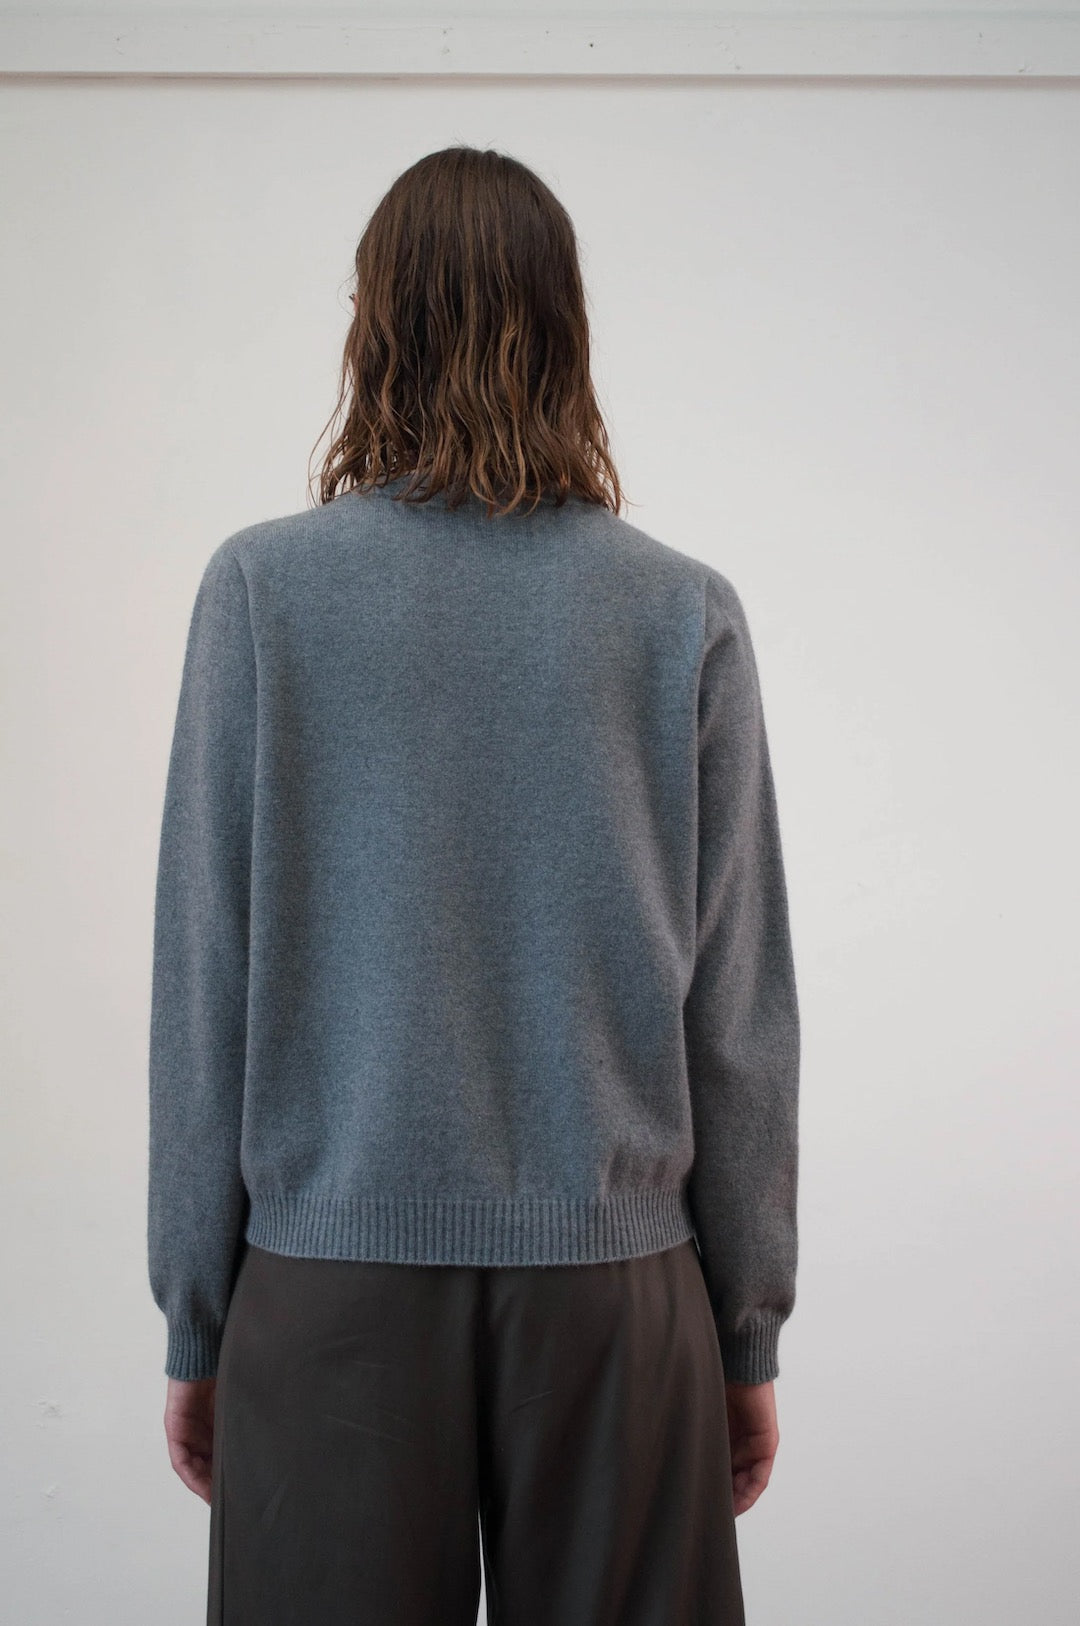 The back view of a woman wearing the OVNA OVICH Kom Cardigan - Stone and trousers.